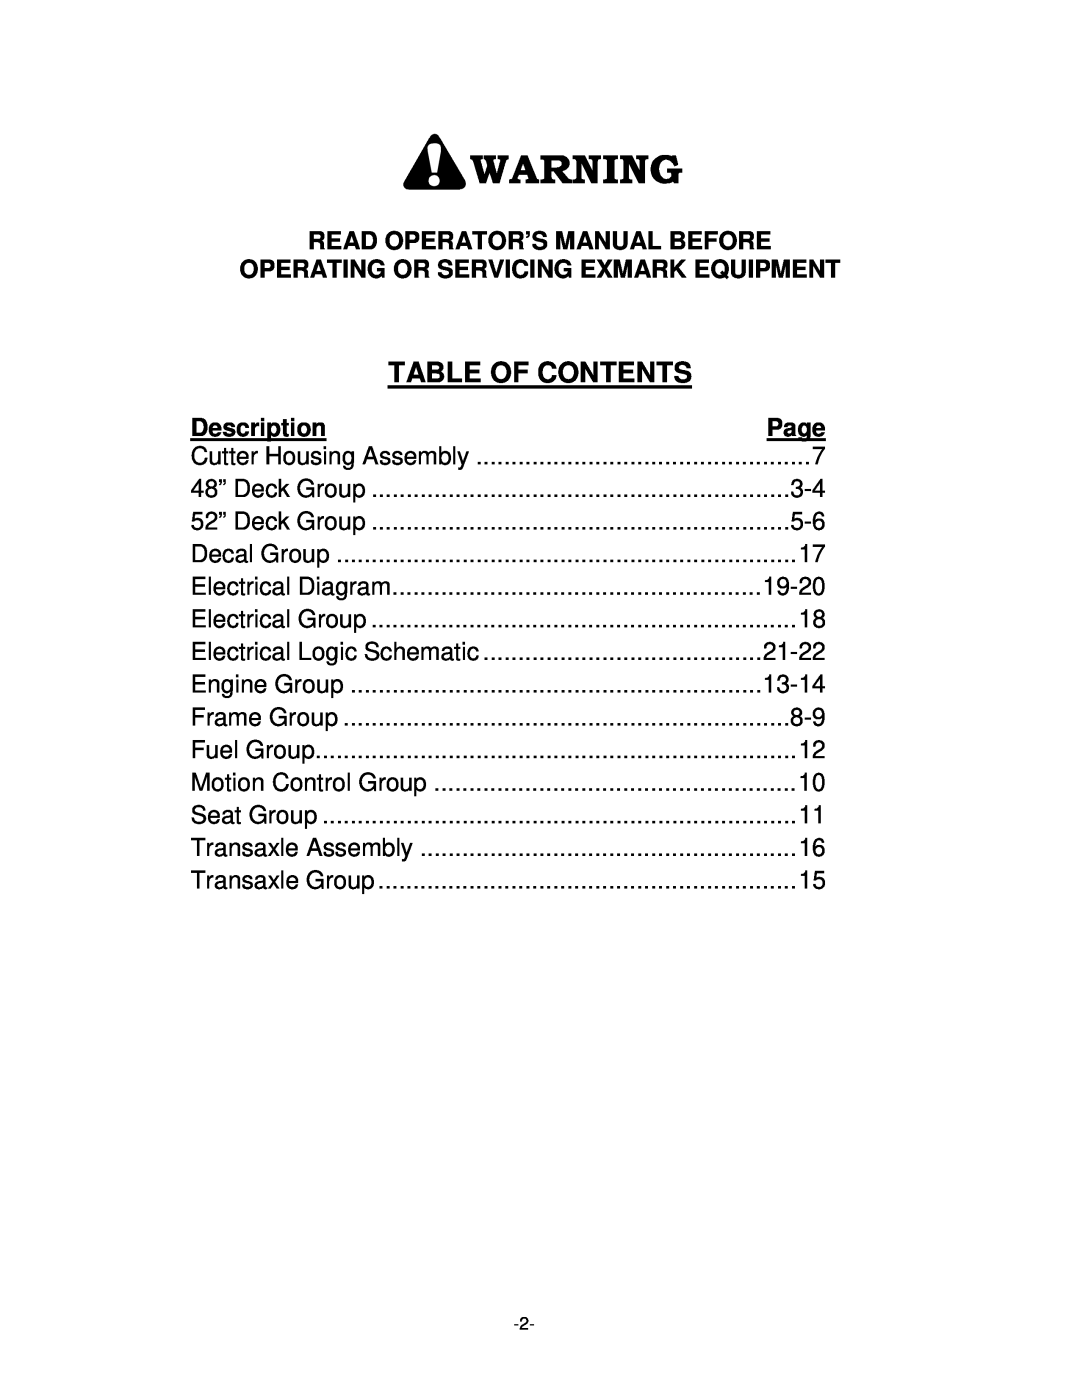 Exmark 4500-339 Table Of Contents, Read Operator’S Manual Before, Operating Or Servicing Exmark Equipment, Description 